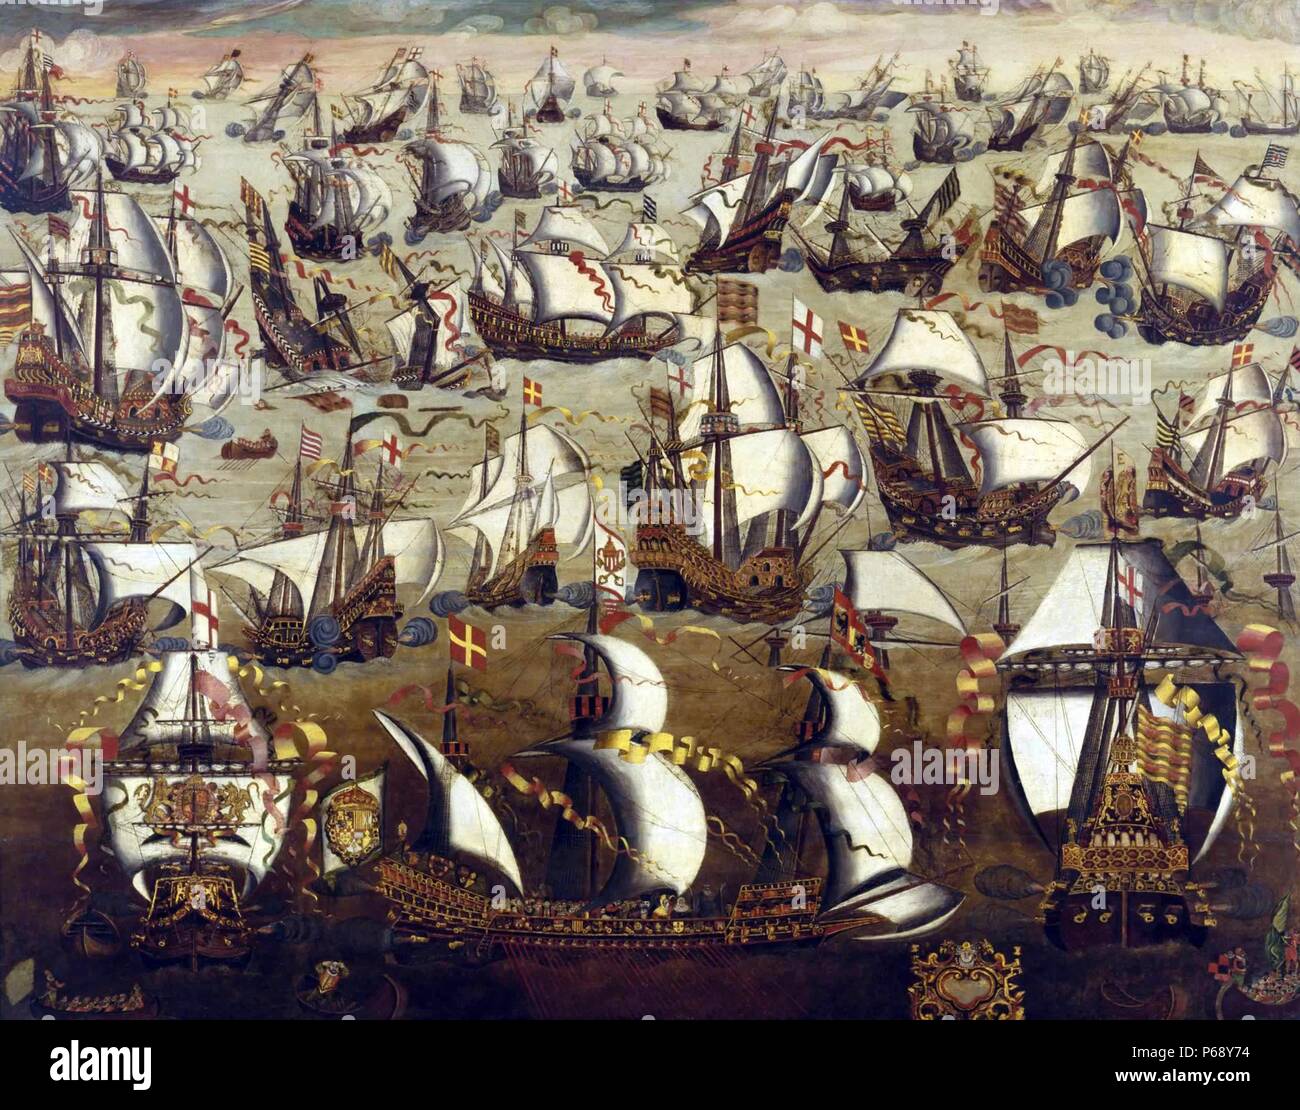 Painting depicting the Spanish Armada, a Spanish fleet or 130 ships that sailed from A Coruña in August 1588, under the command of the Duke of Medina Sidonia with the purpose of escorting an army from Flanders to invade England. Dated 16th Century Stock Photo